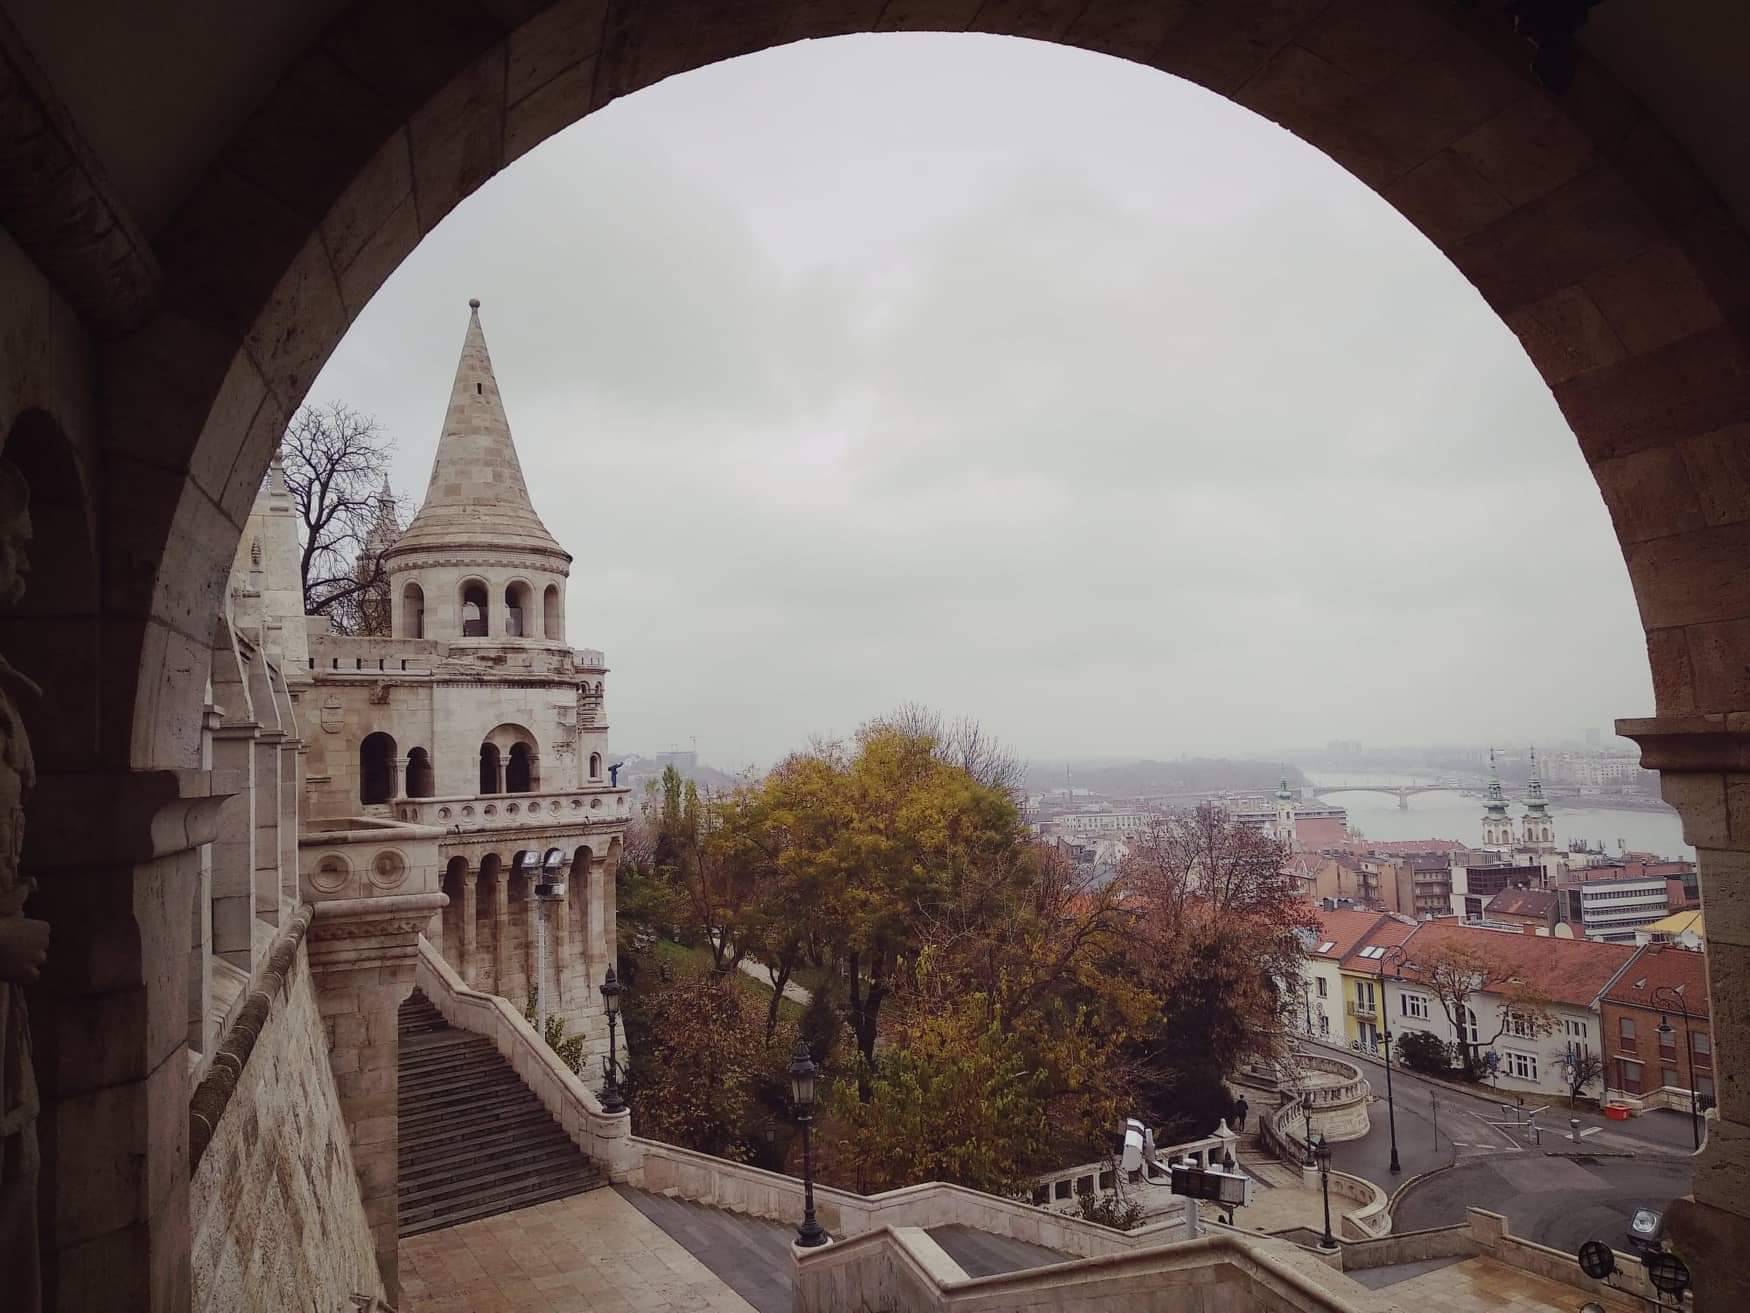 Fisherman's bastion in Budapest